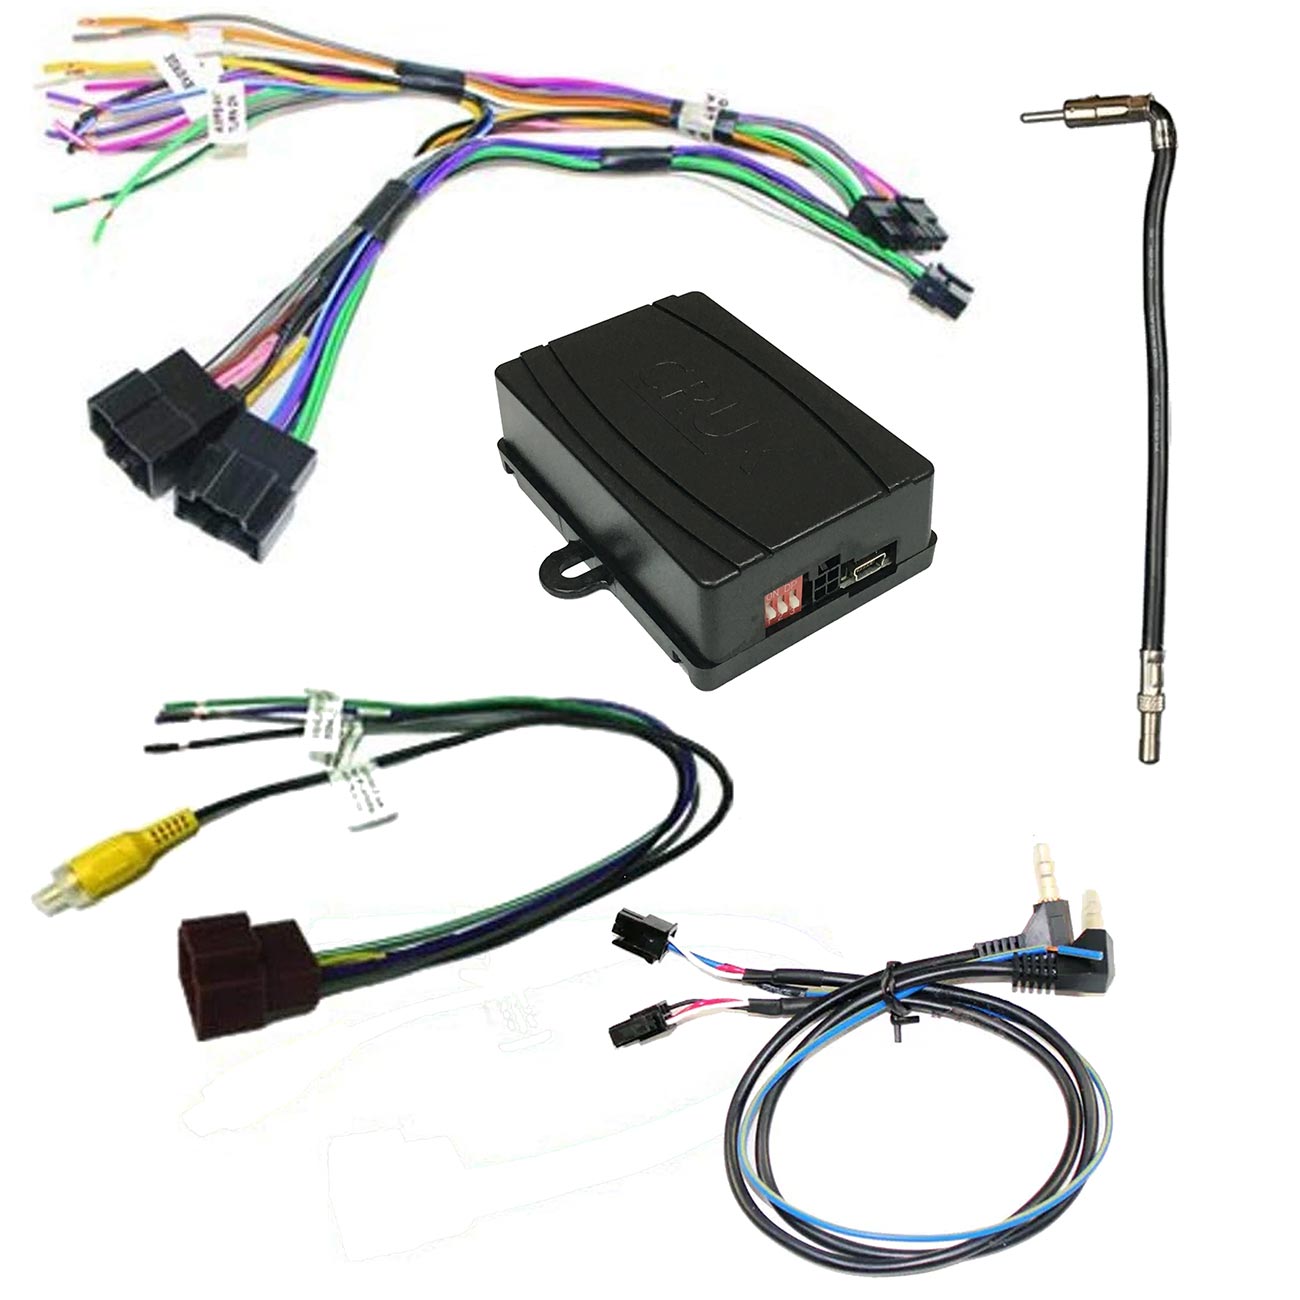 Crux Radio Replacement Interface with Steering Wh. Control Retention - Select GM Vehicles 2019 - Up